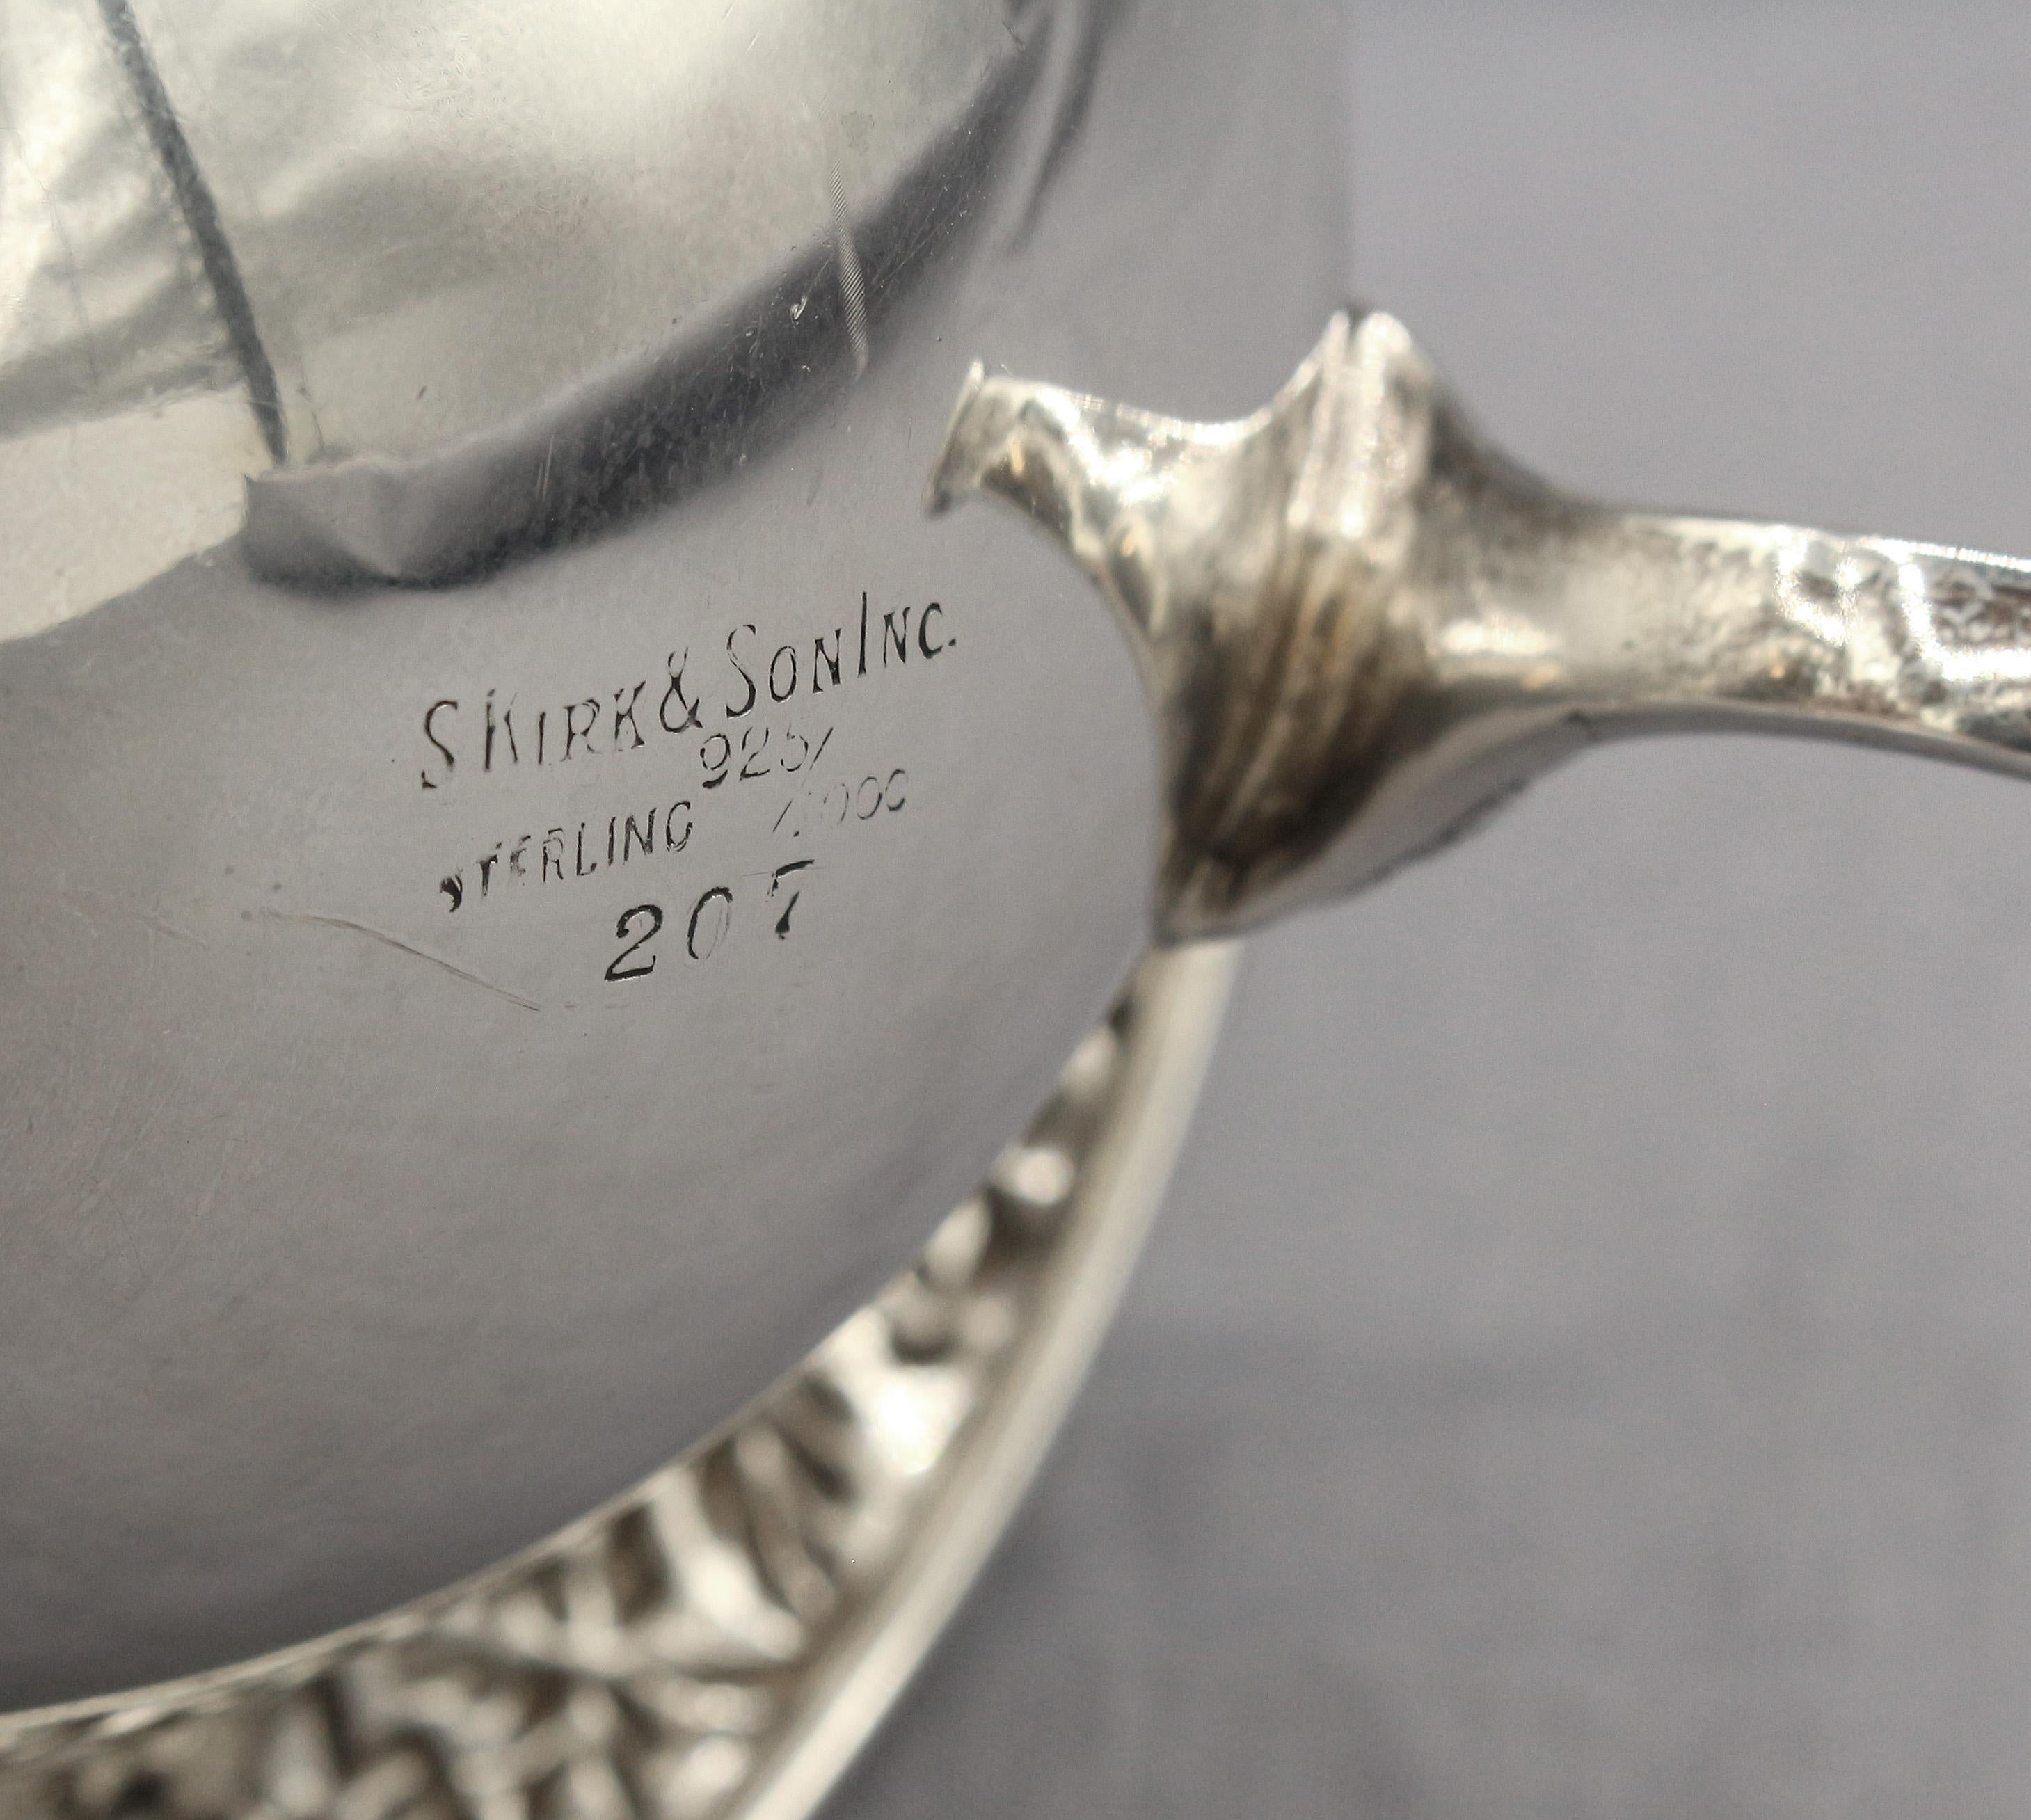 20th Century Sterling Open Sugar Bowl by S. Kirk & Son, Inc.